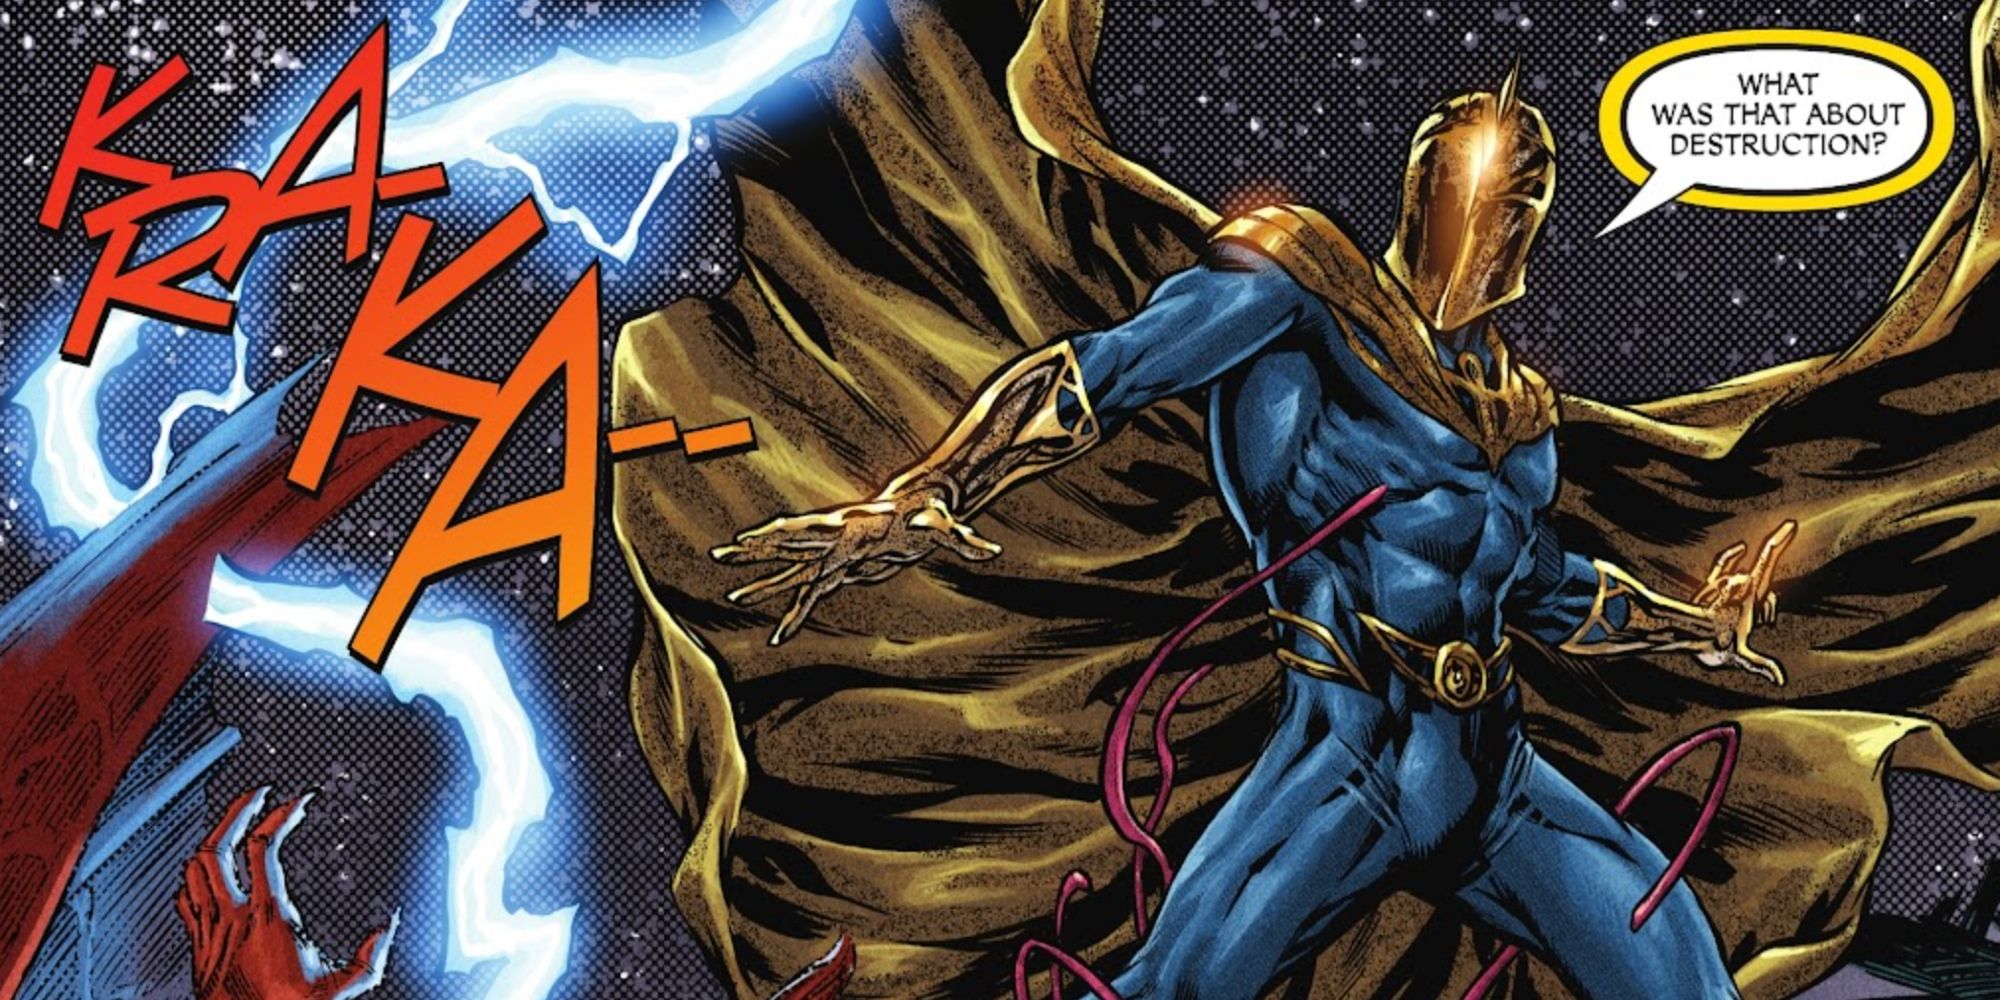 Doctor Fate summoning lightning in The Justice Society Files #1